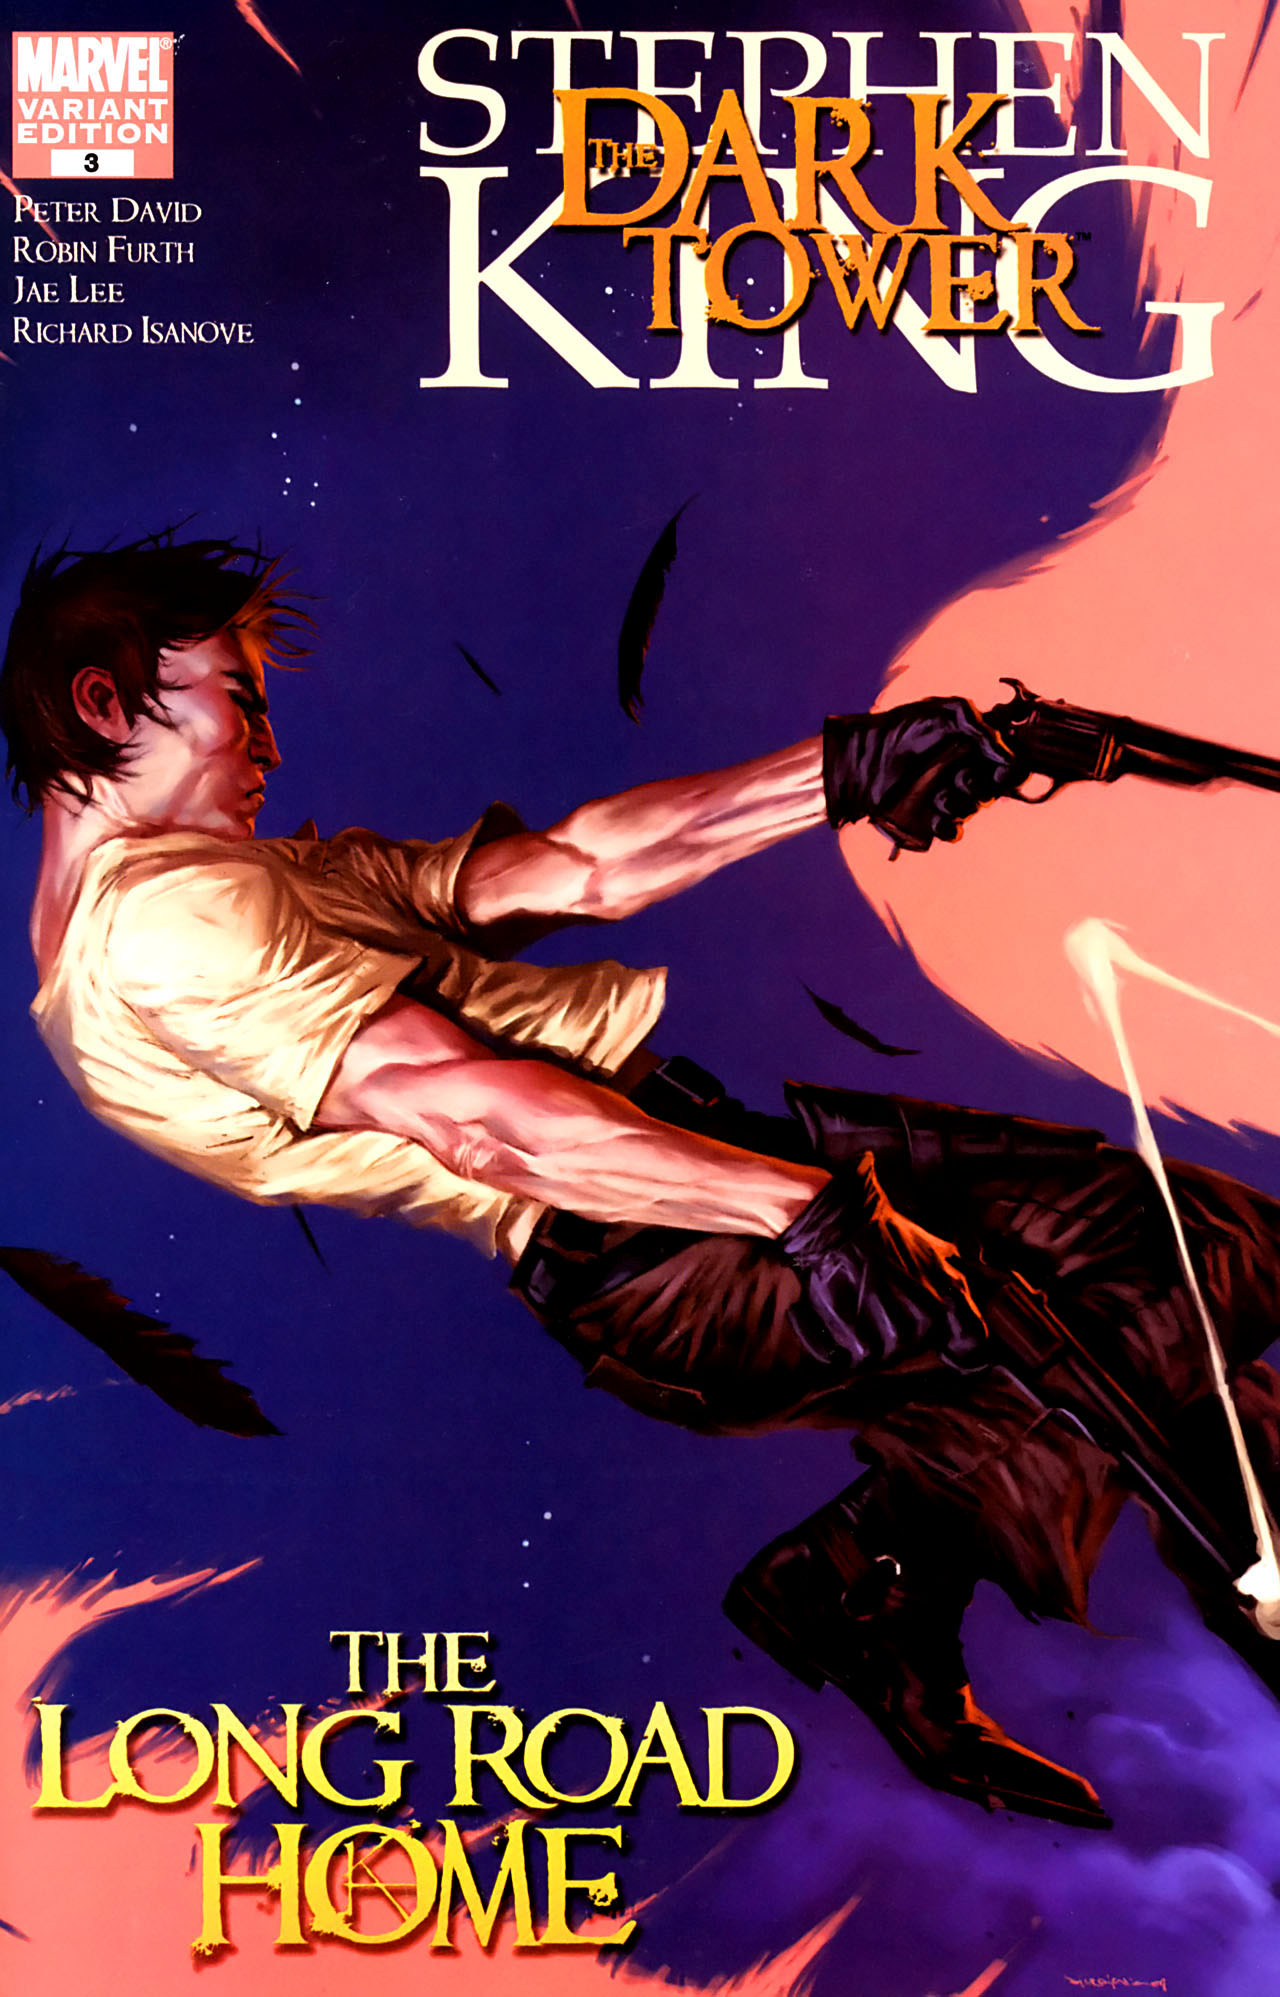 Dark Tower: The Long Road Home #3 - Part Three